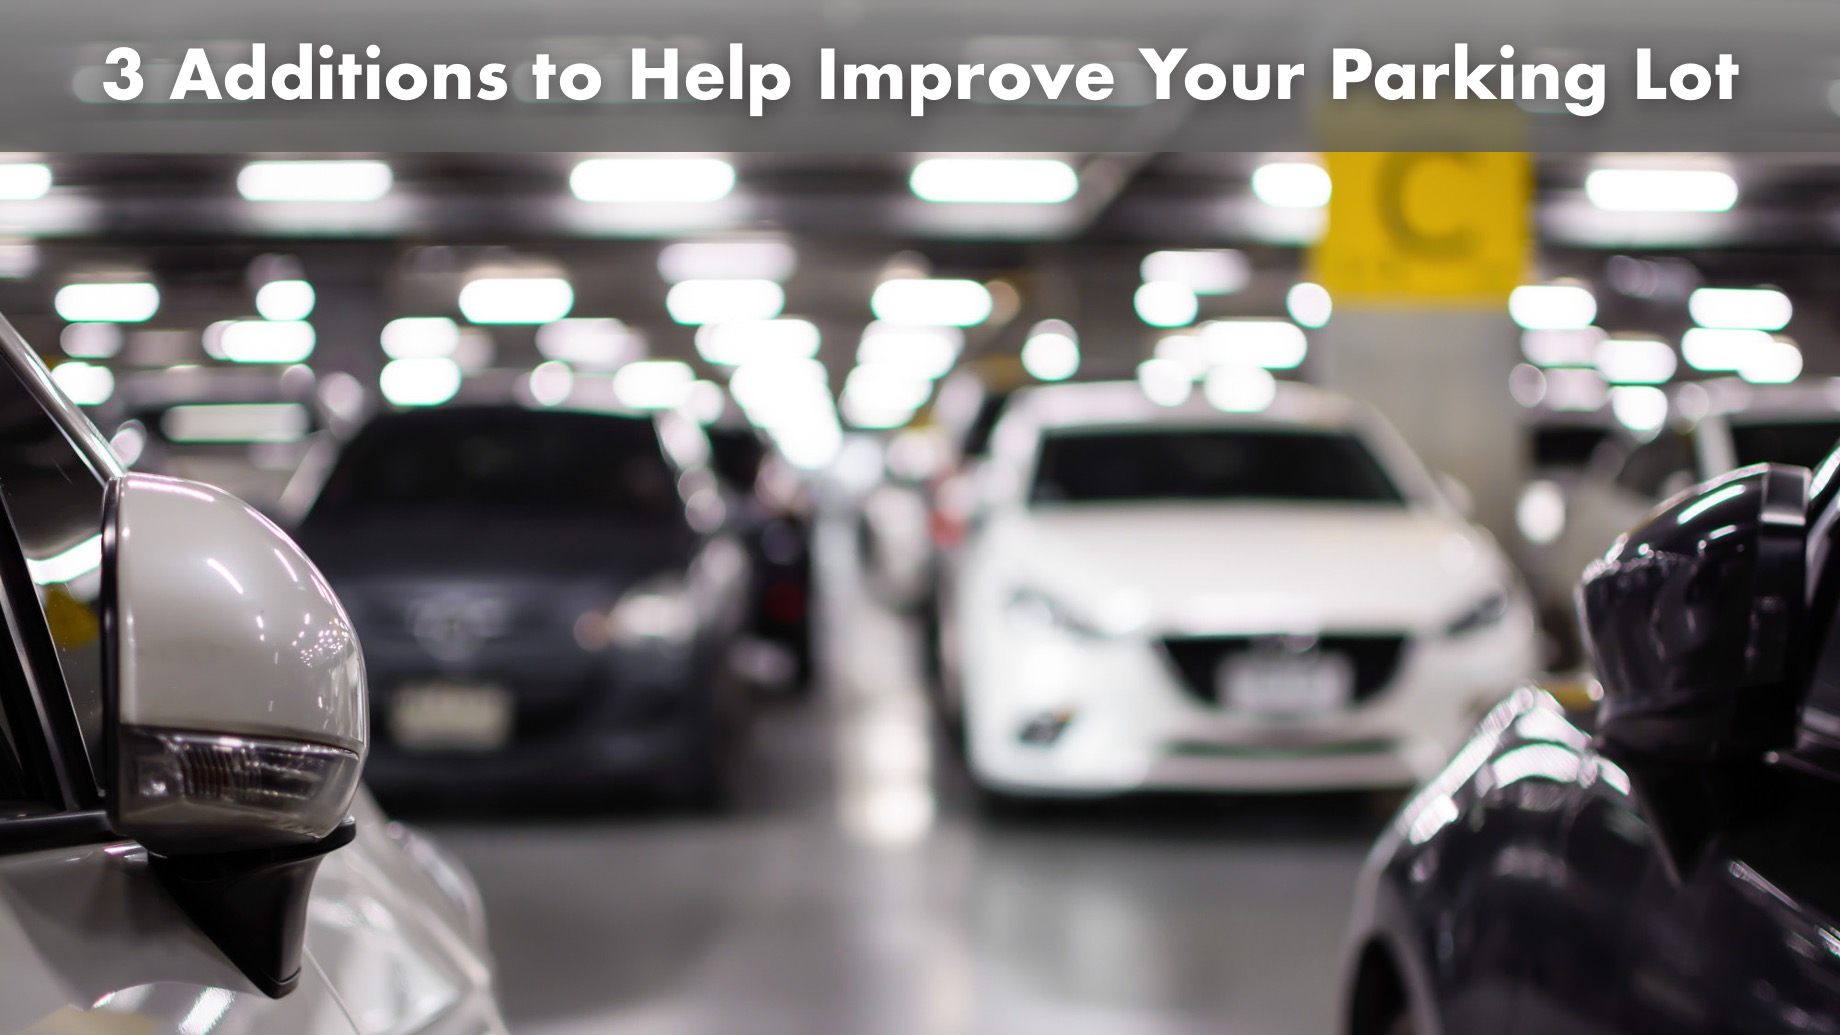 3 Additions to Help Improve Your Parking Lot